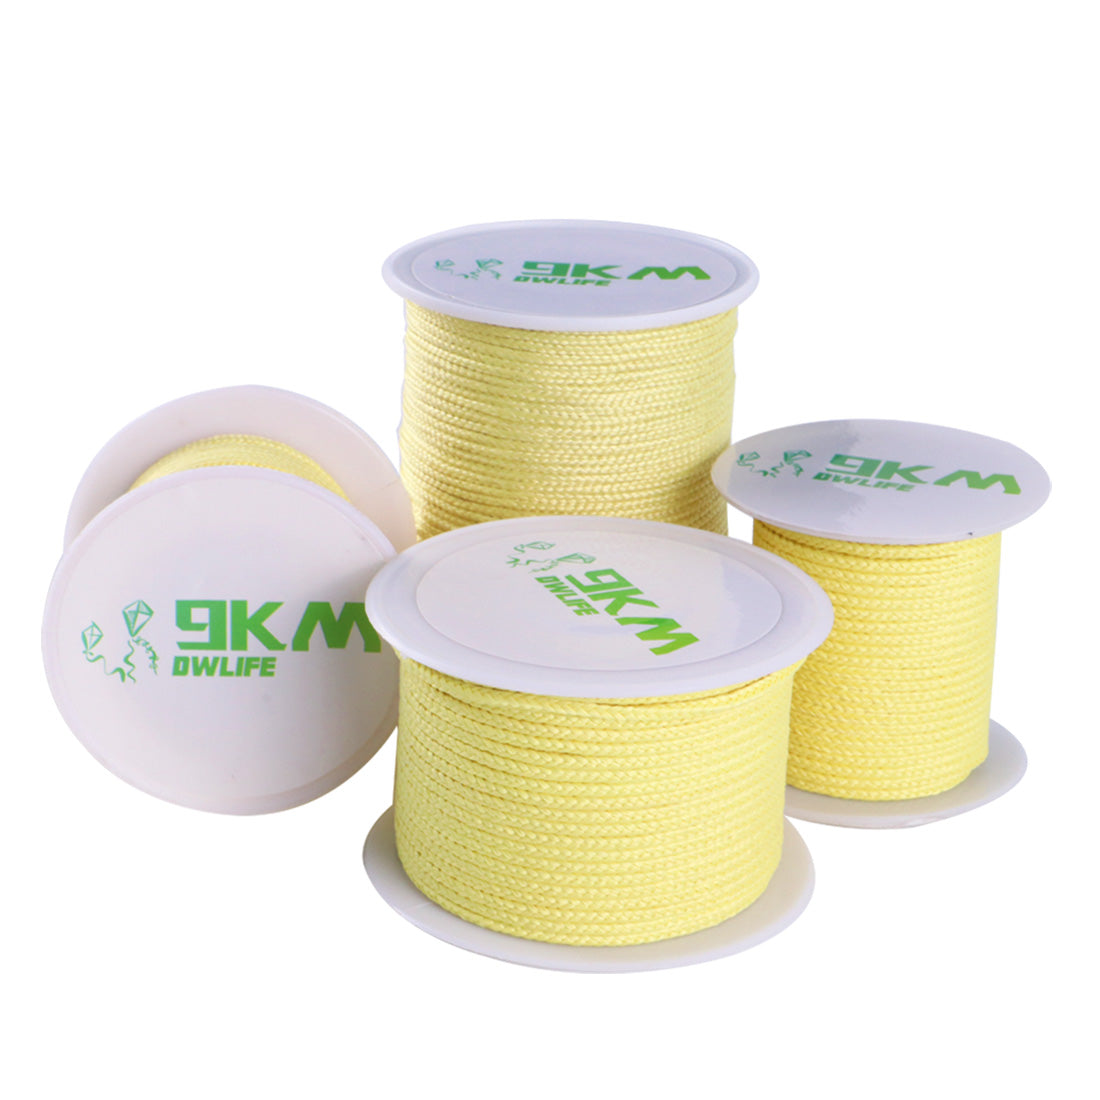 9KM DWLIFE Braided Kevlar String 100lb~1500lb Fishing Assist Line High  Strength Tensile Heat Resistant for Paracord Cord Ultralight Tactical  Survival